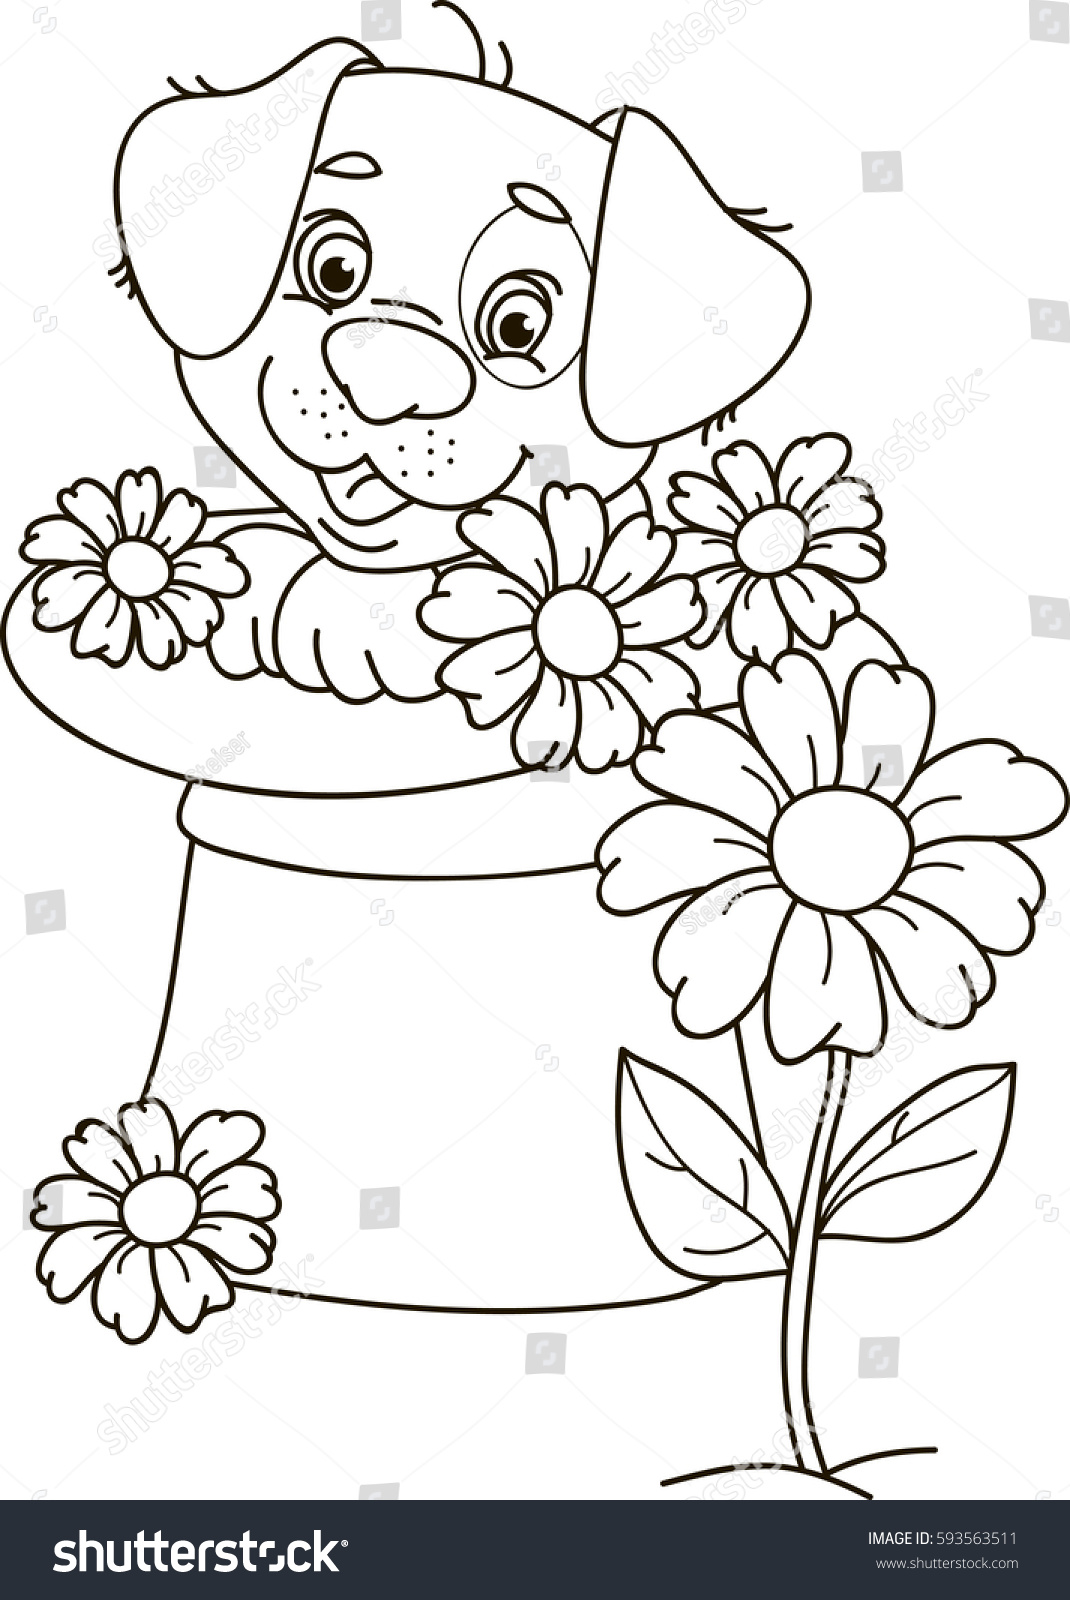 Coloring Page Outline Cartoon Puppy Dog Stock Vector